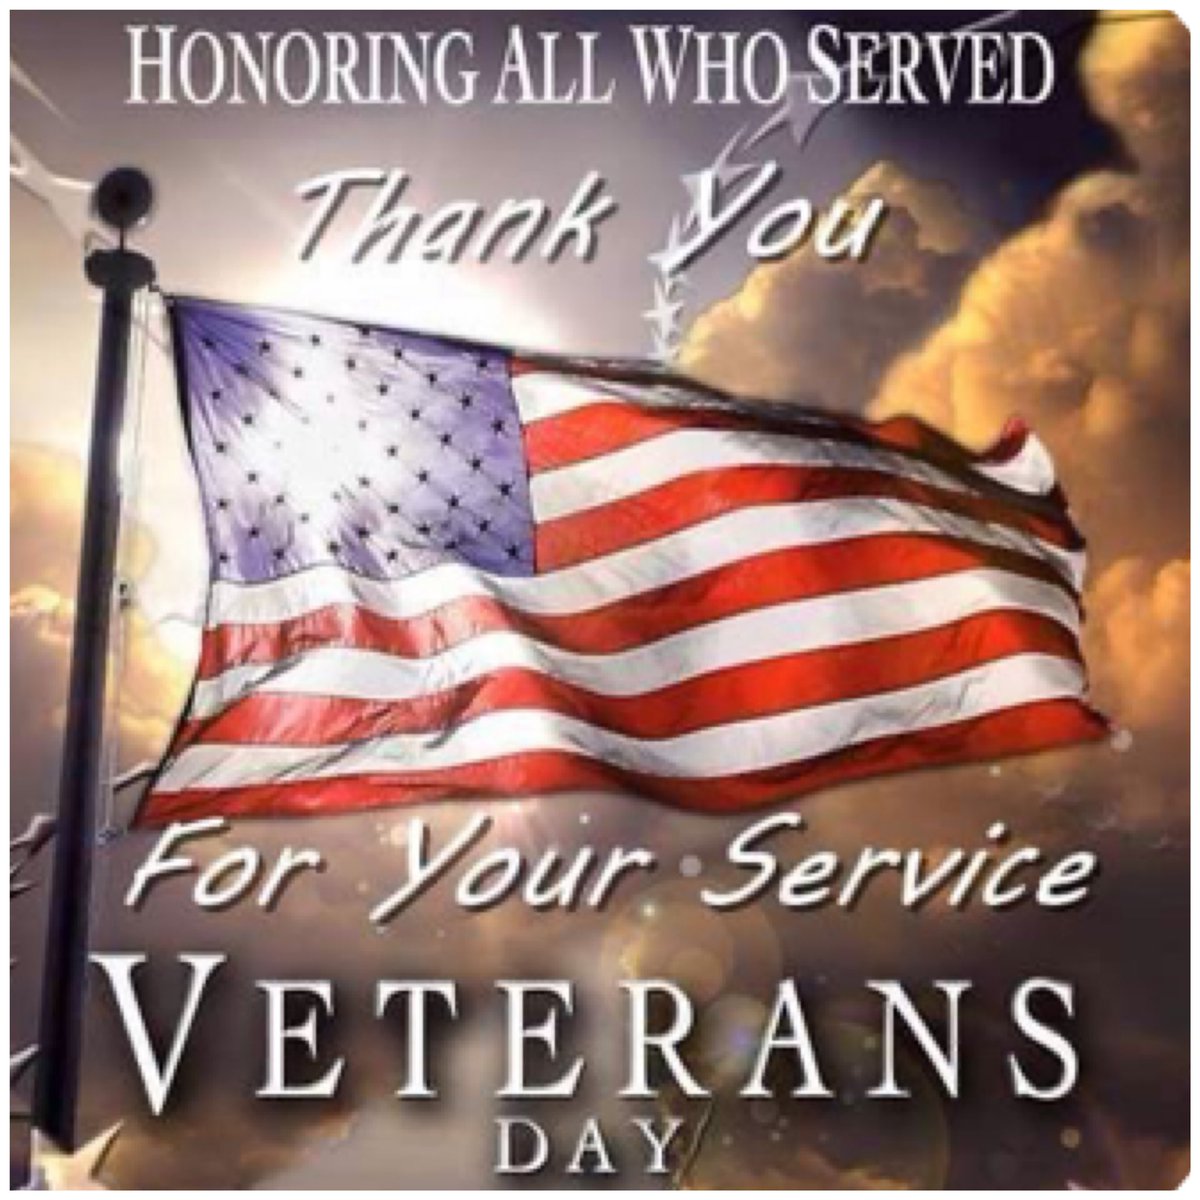 Thank You to all the Veteran’s that served to protect our freedoms!
#GodBlesstheUSA #Navyfamily #sacrifice ❤️🇺🇸💙🇺🇸❤️